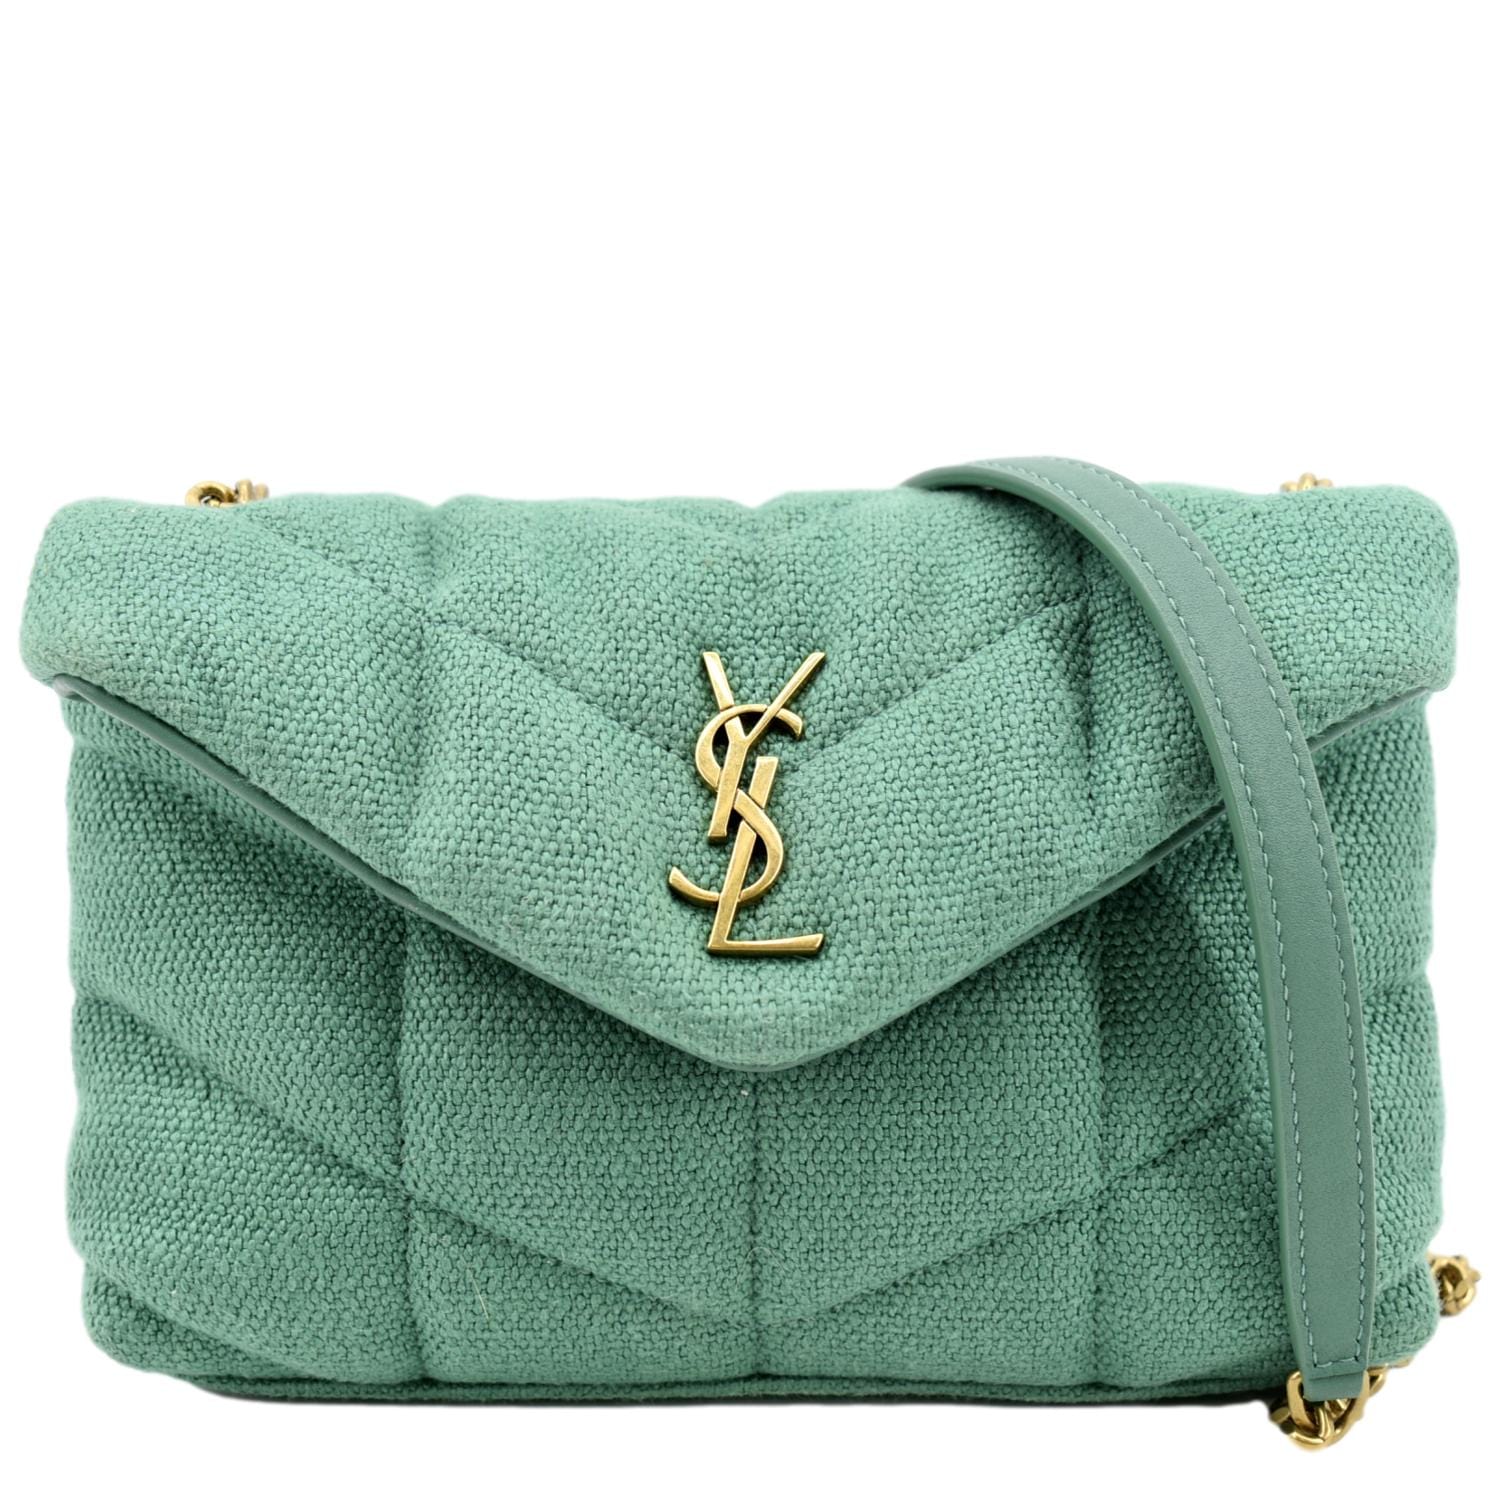 YVES SAINT LAURENT Loulou Puffer Mini Quilted Canvas Crossbody Bag Lig